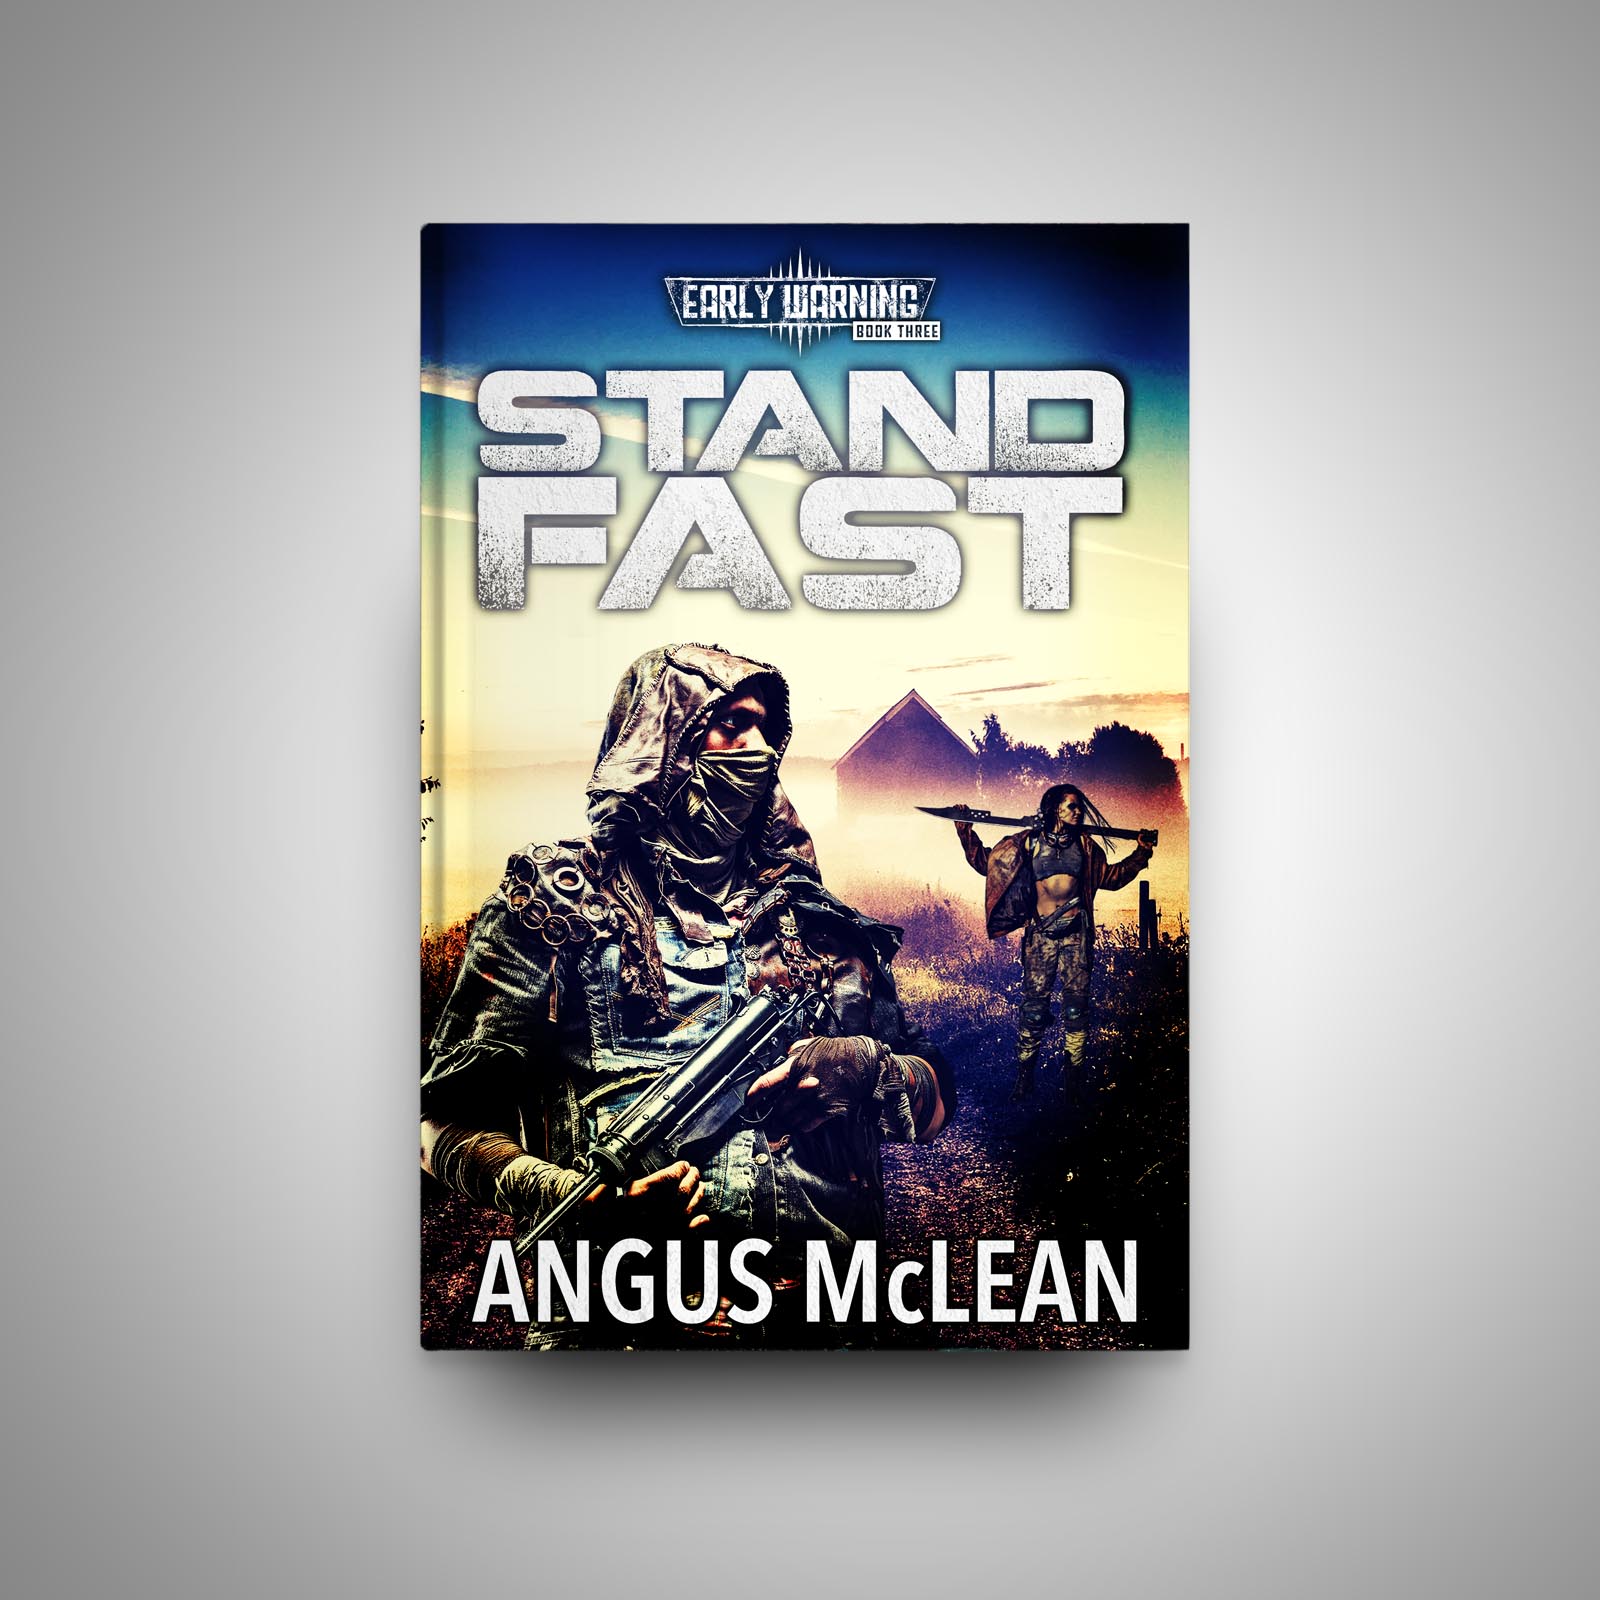 Angus McLean ebook download kindle Early Warning Stand Fast post-apocalypse ebooks